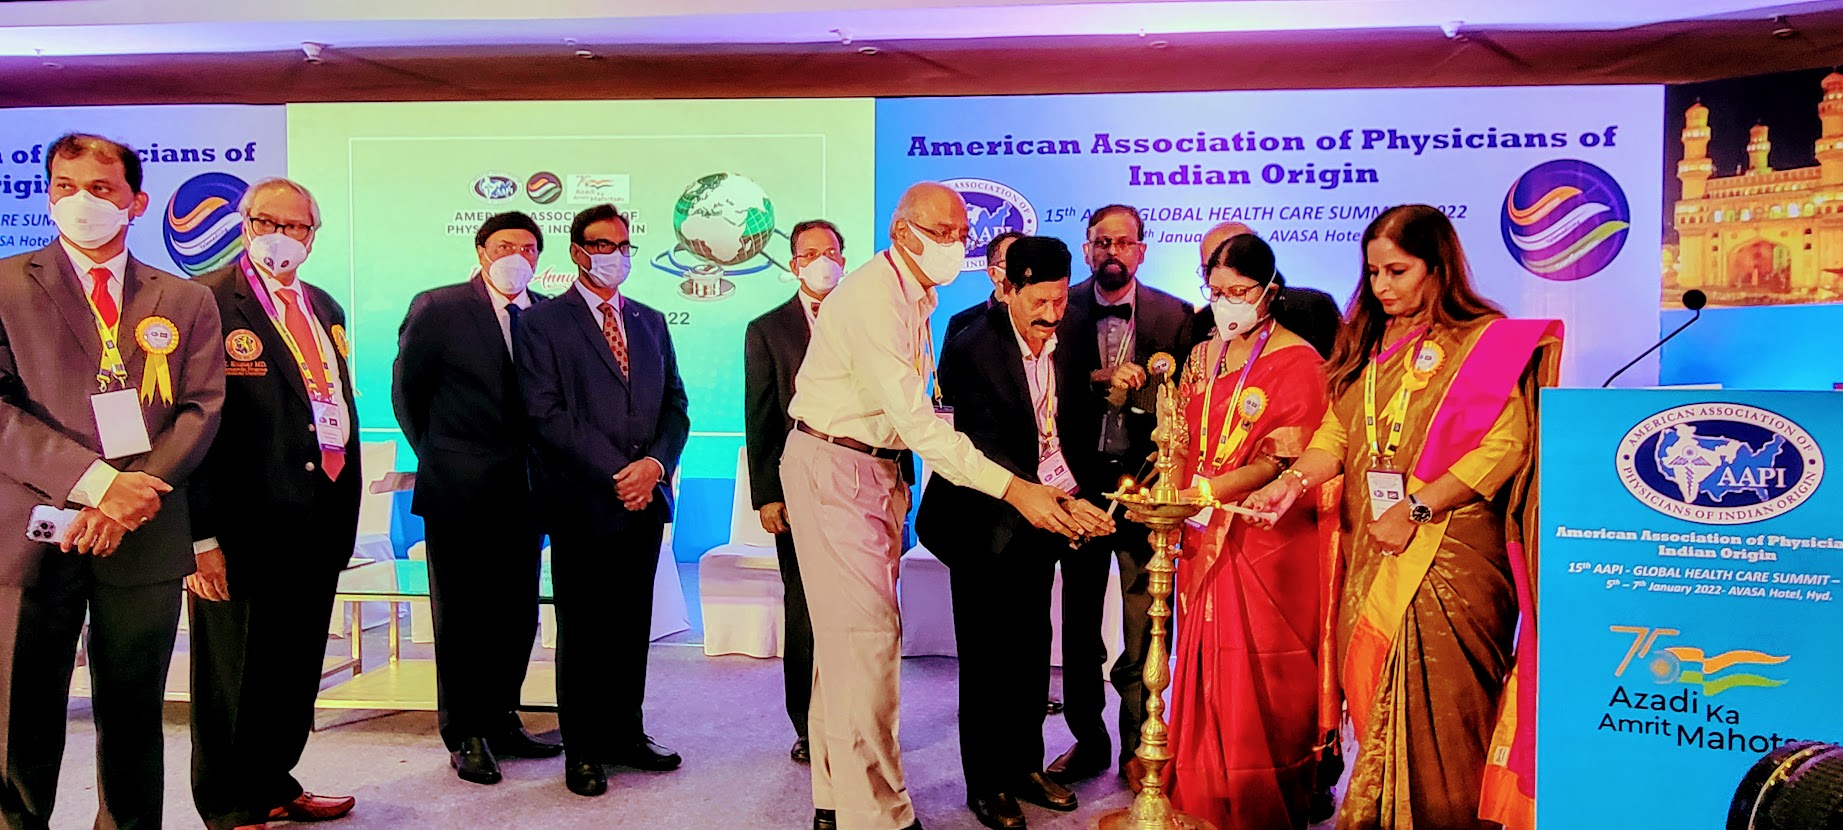 History in Hyderabad: Doctors of Indian origin make a commitment to preventive healthcare In India